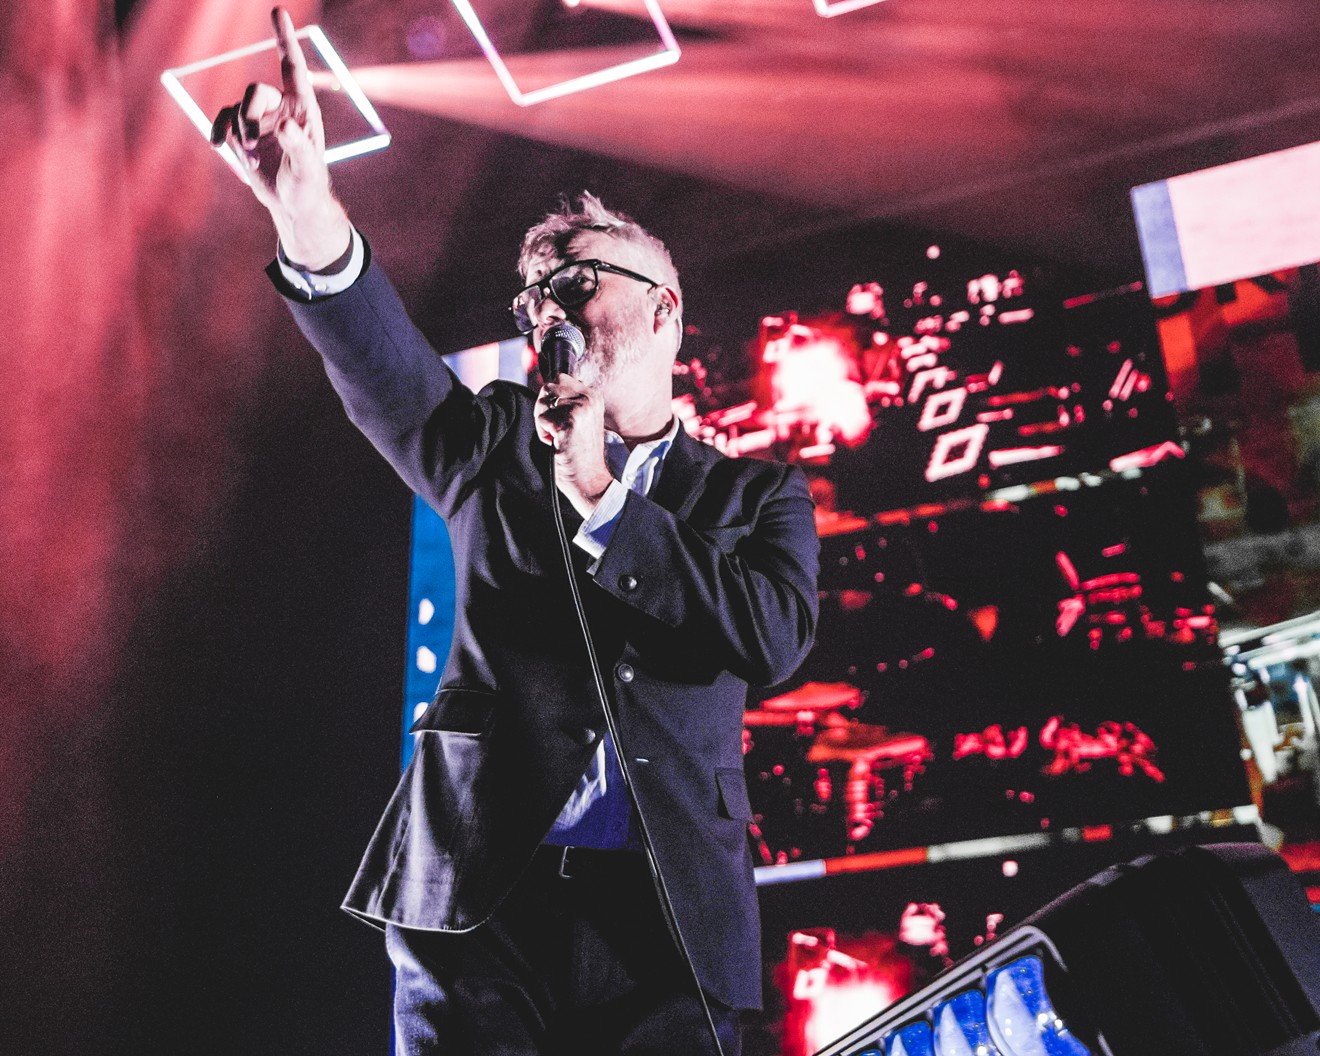 Matt Berninger led his band into a wave of emotions in Irving.